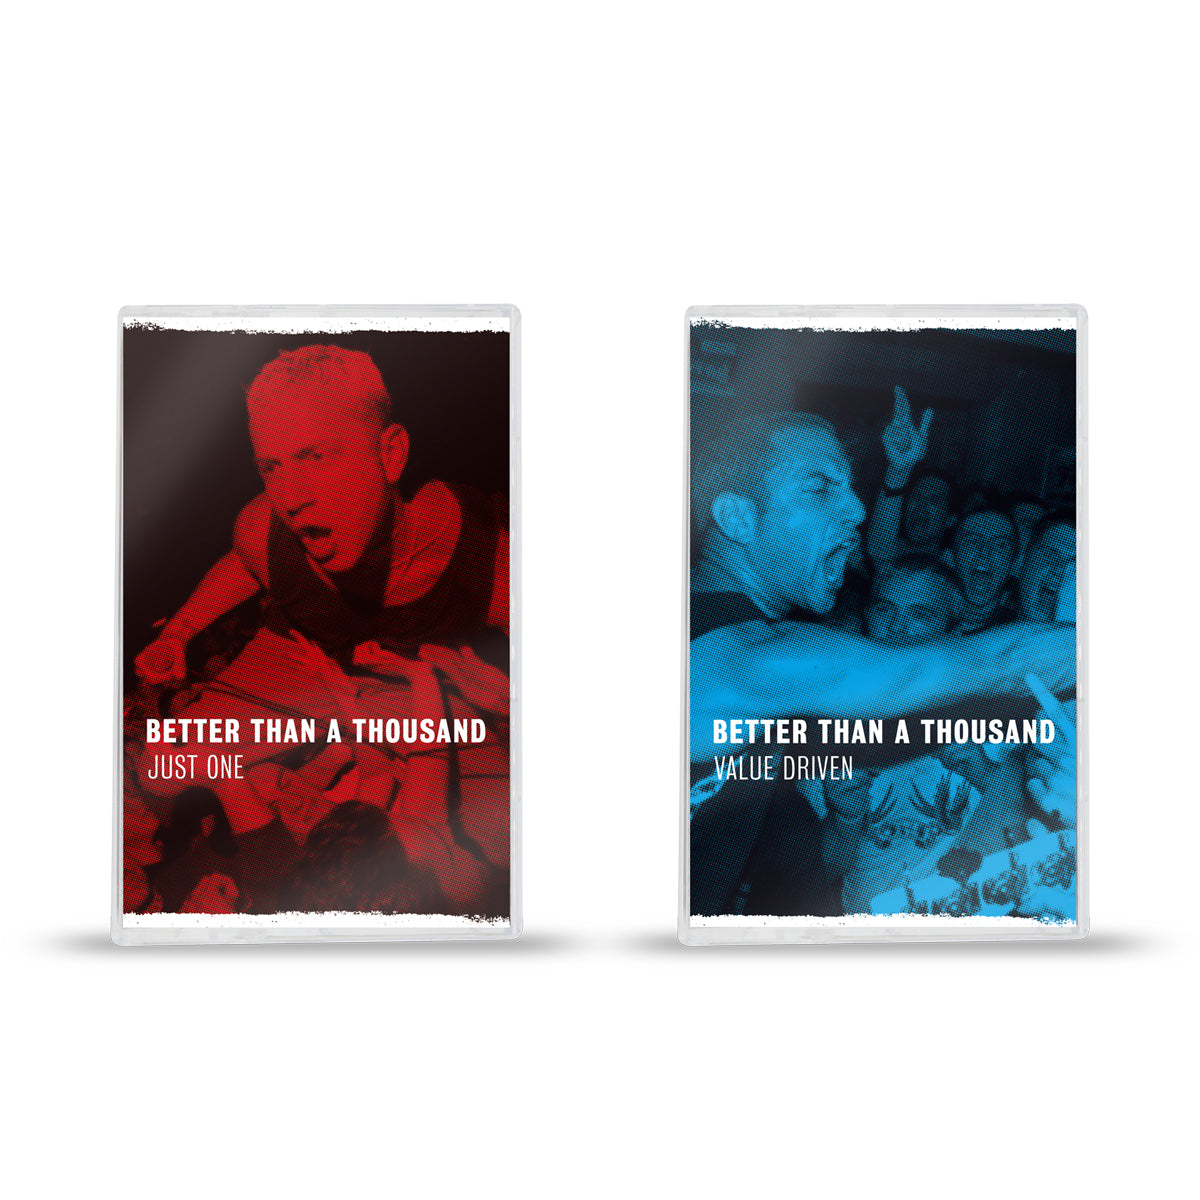 BETTER THAN A THOUSAND "Just One + Value Driven" Tape Bundle